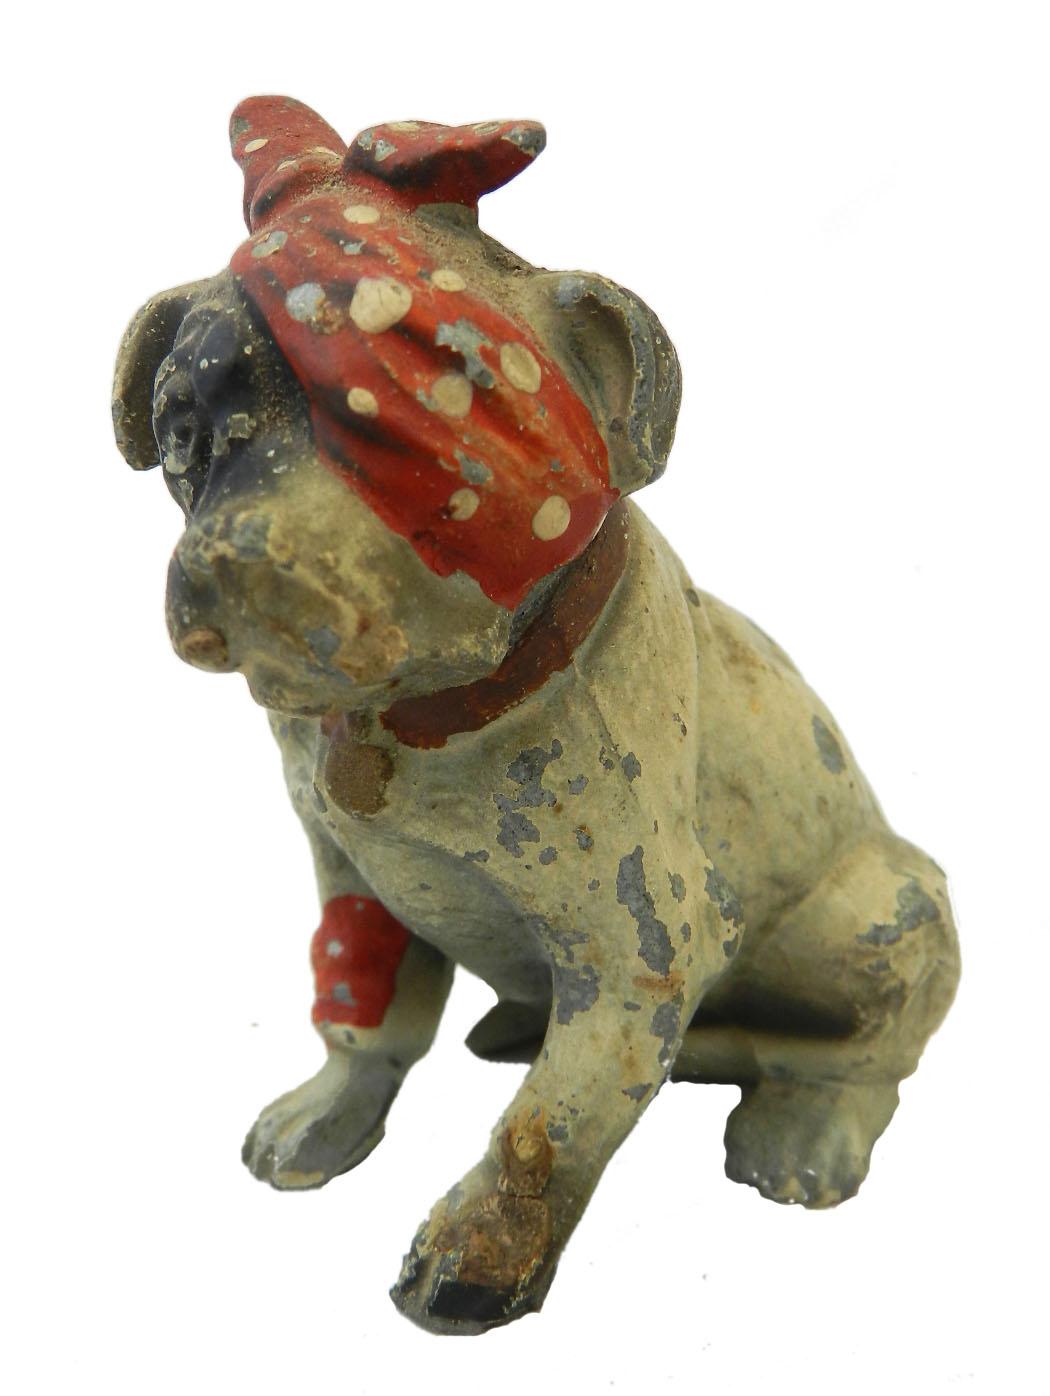 Austrian cold painted metal model of a dog late early 20th century
Most likely a bull terrier puppy feeling a bit sorry for himself.... having 'been in the wars'!!
Marked Austria underneath
Absolutely charming gloriously distressed
The original